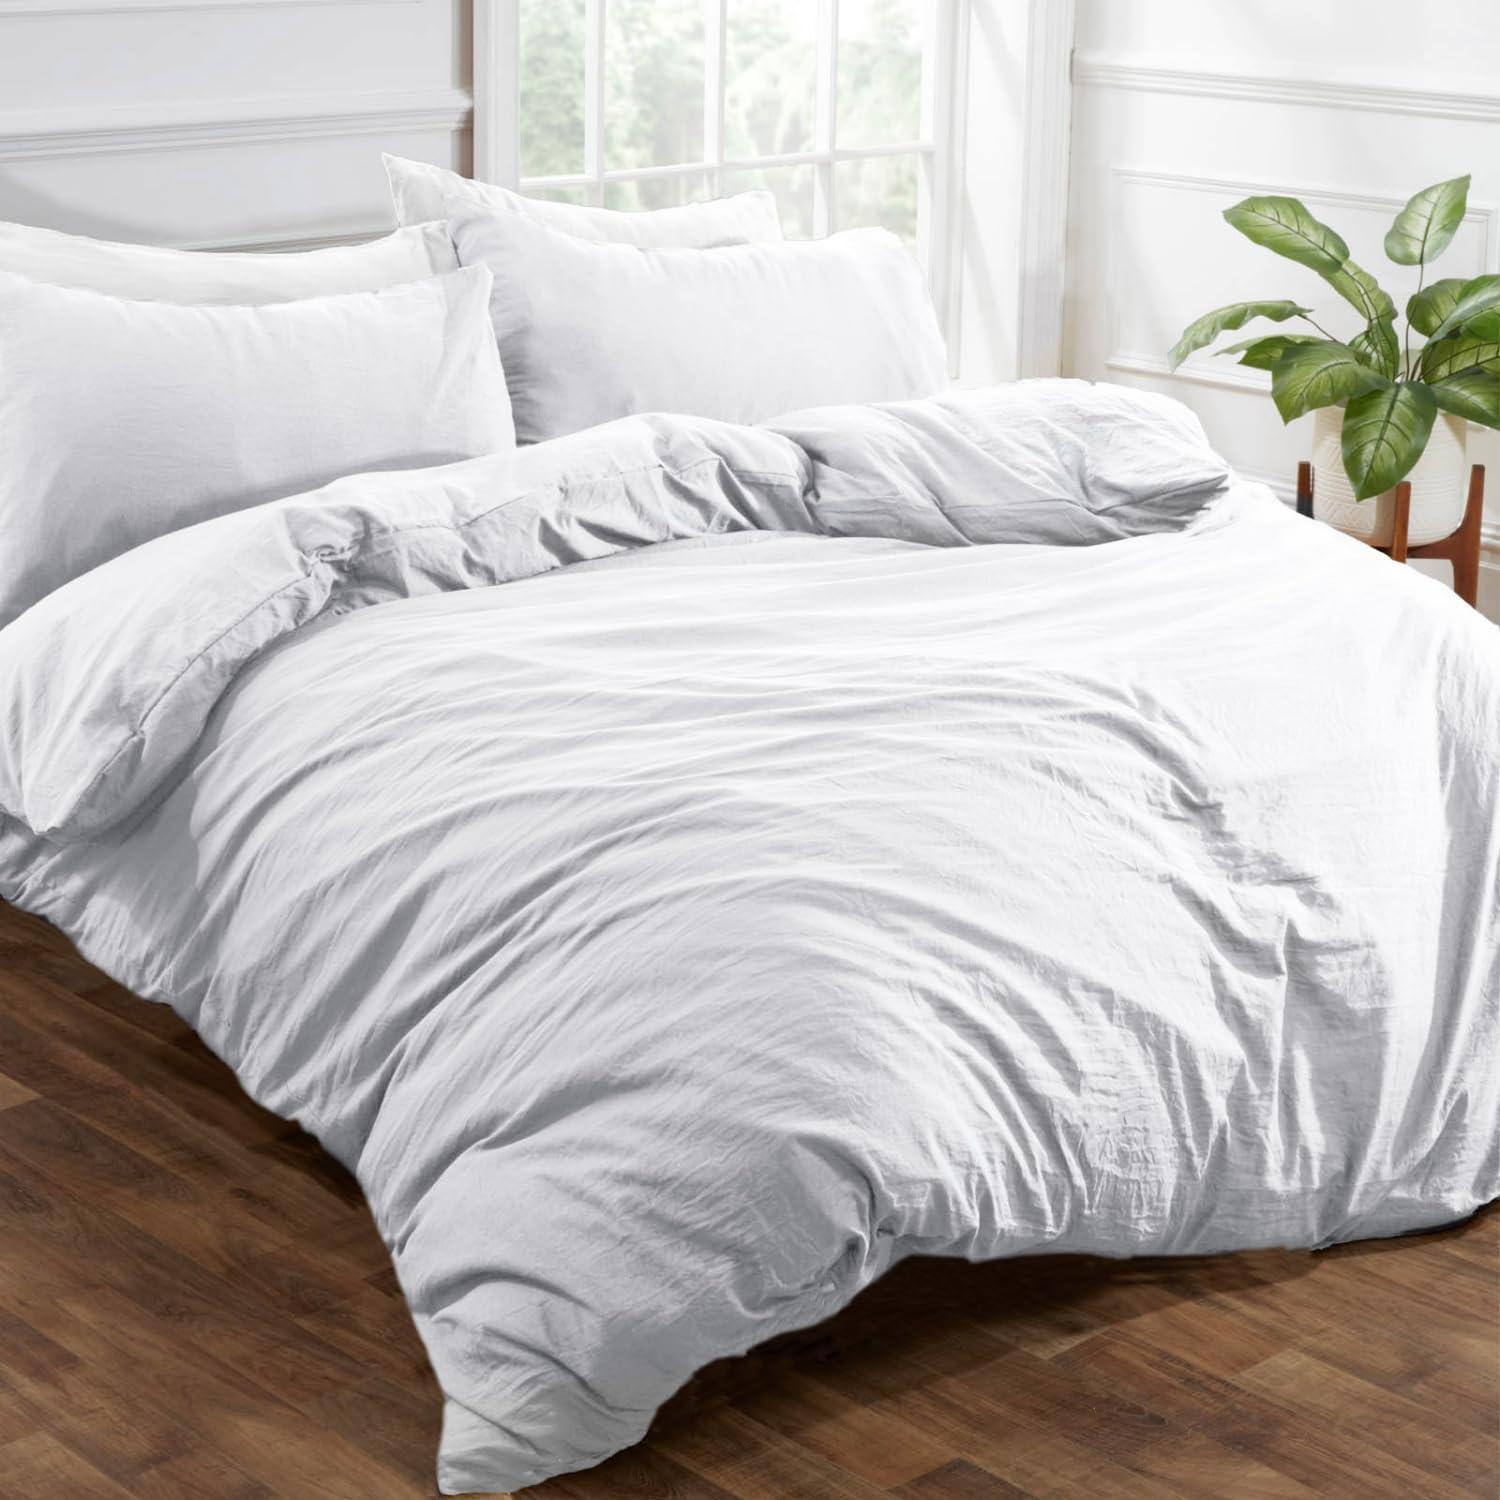 Washed Linen White Duvet Cover King with 2 Pillow Cases Super Soft Brushed Microfiber Linen Bedding Set King Duvet Cover 104 x90 - Loomini